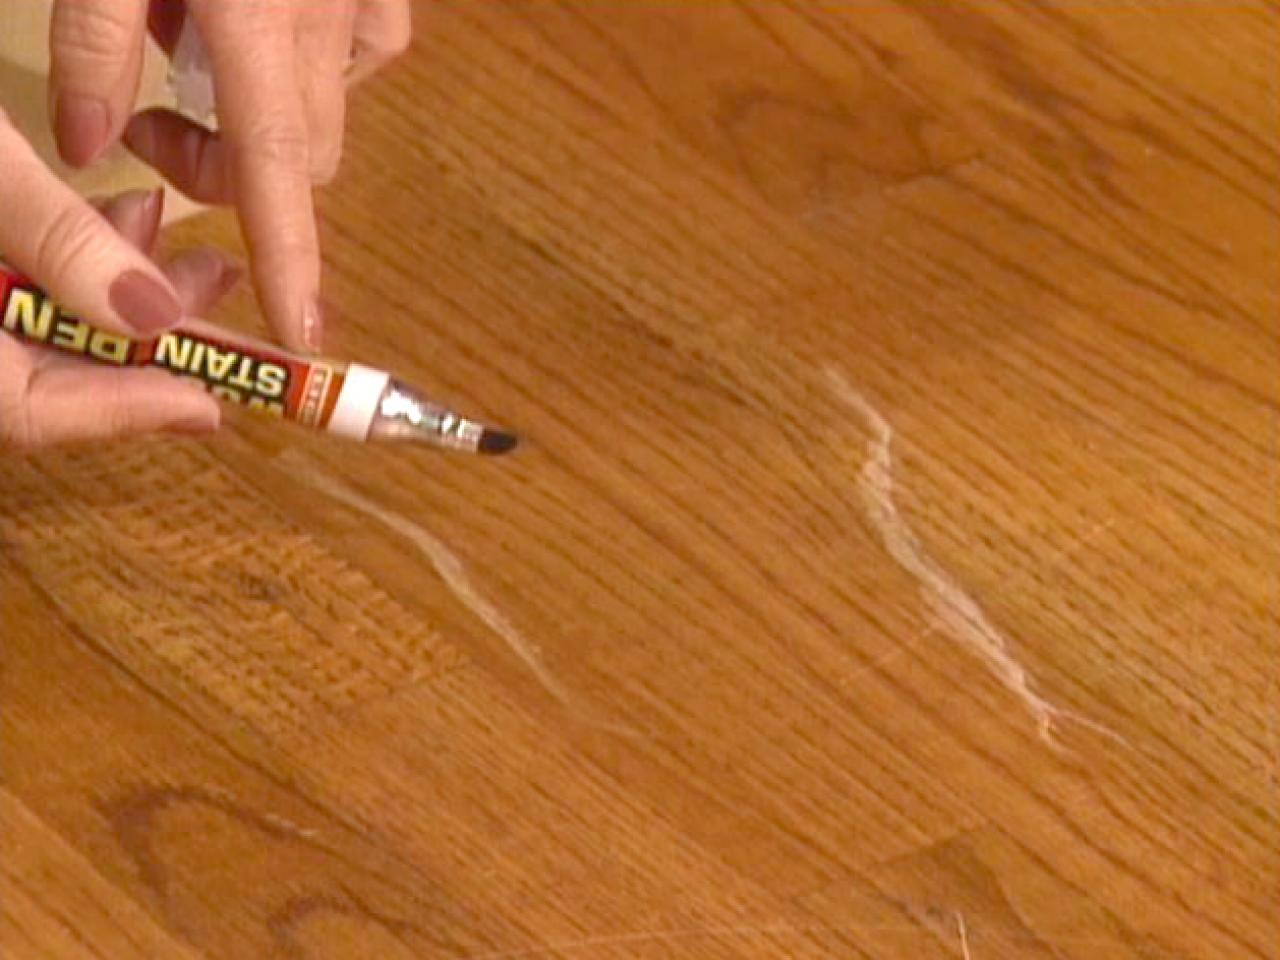 How To Touch Up Wood Floors Tos Diy, How Do You Repair Hardwood Floors